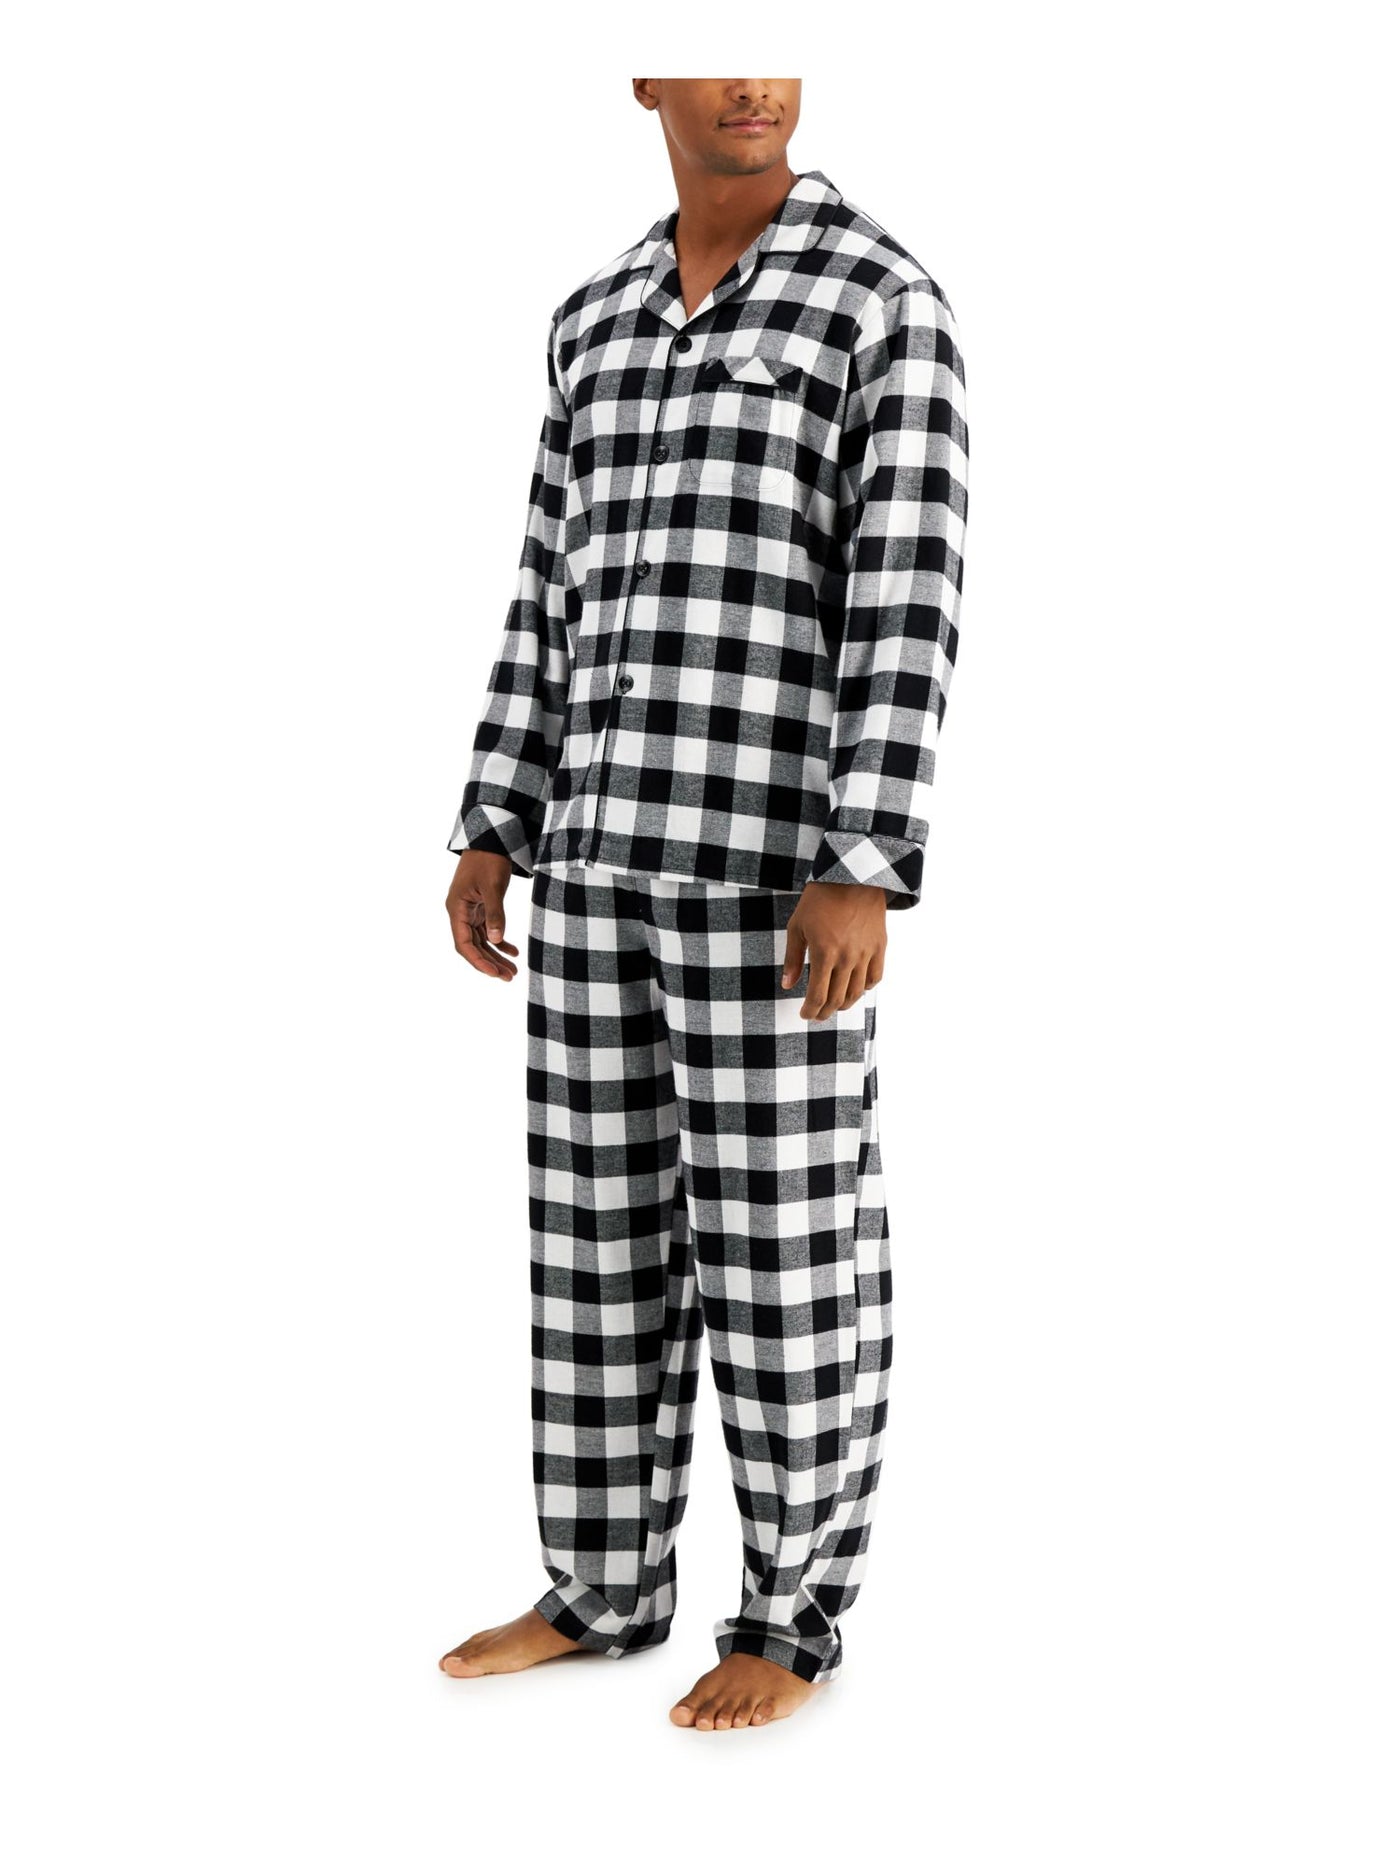 FAMILY PJs Mens Black Plaid Notched Collar Long Sleeve Button Up Top Straight leg Pants Flannel Pajamas S